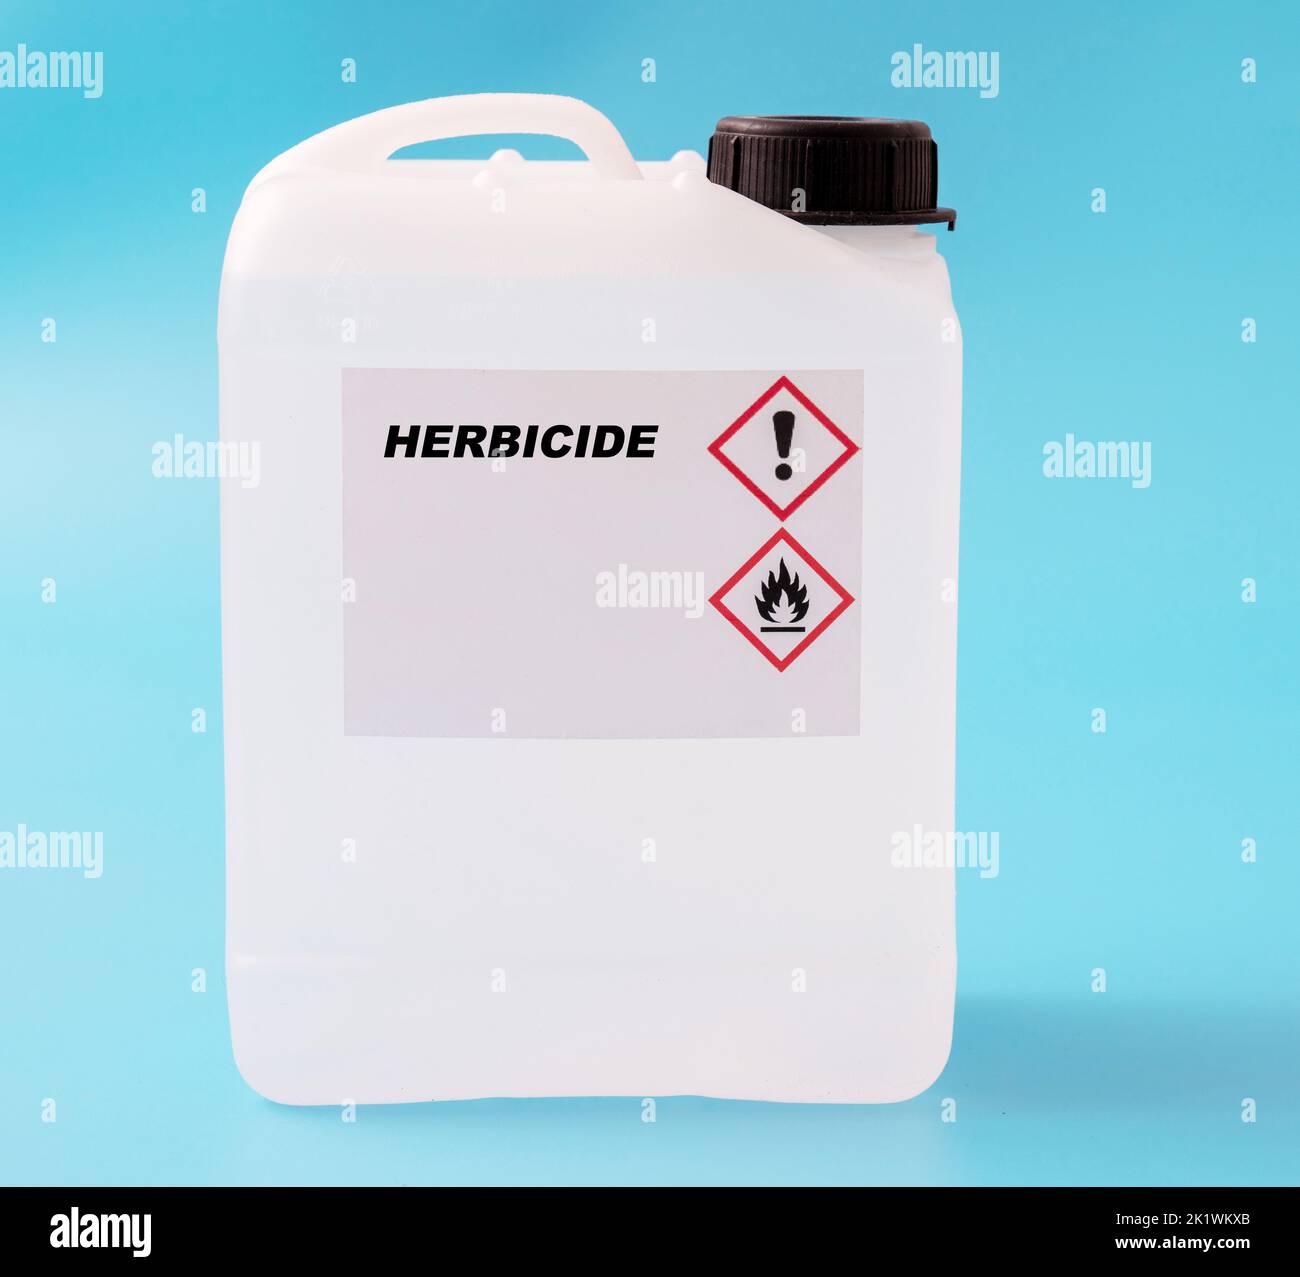 Herbicide in a plastic canister, conceptual image Stock Photo